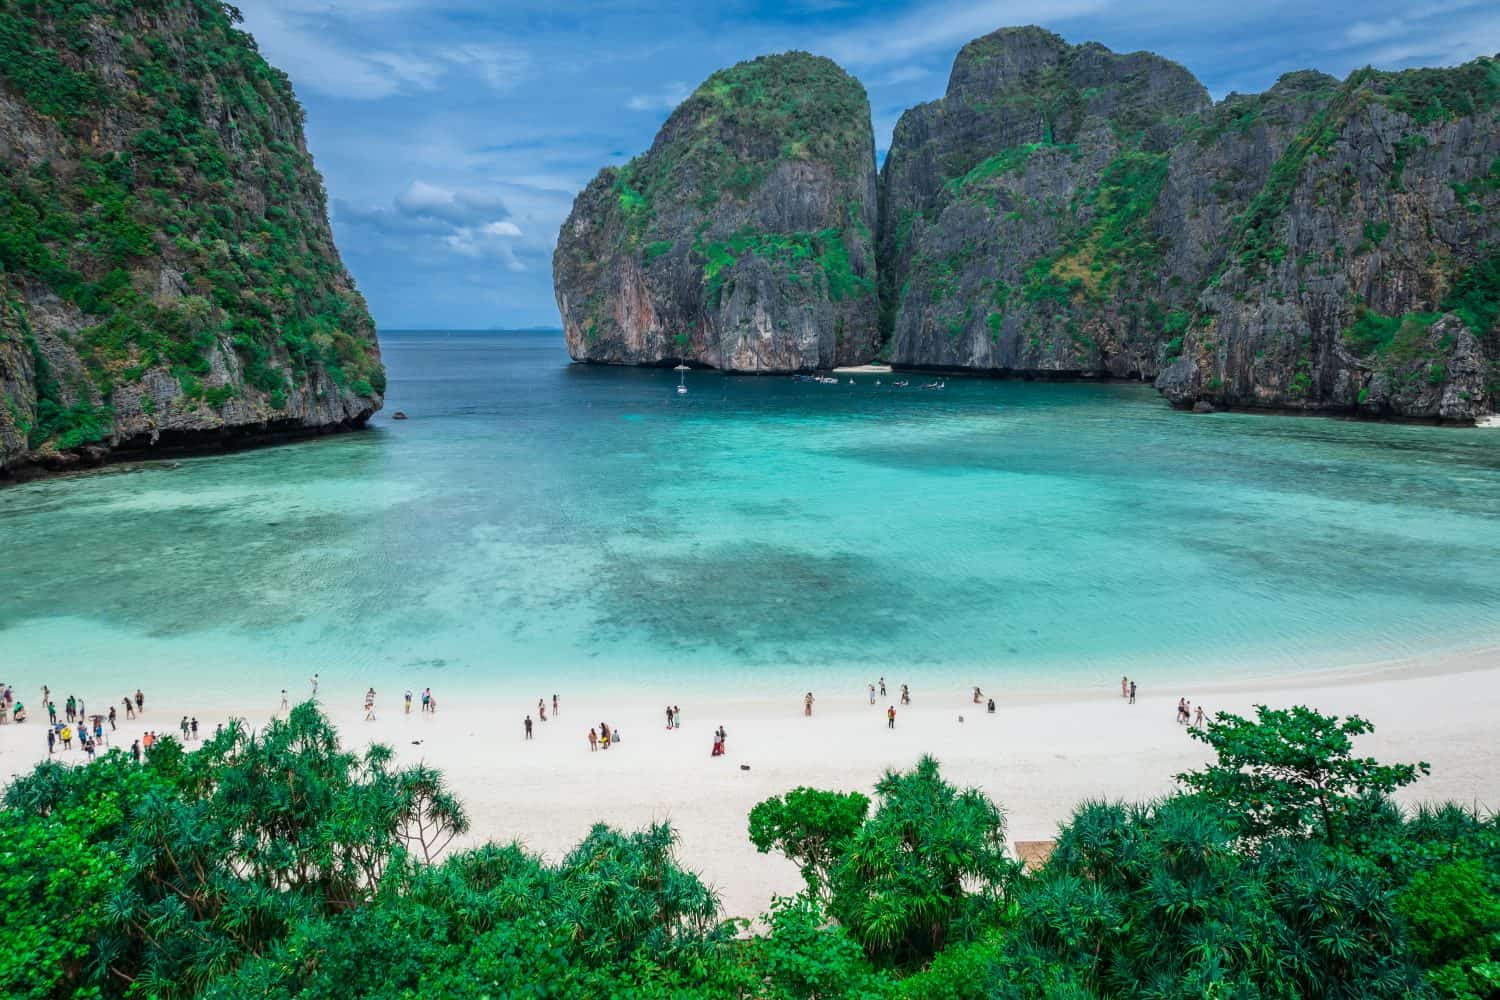 <ul> <li><strong>Location:</strong> Thailand</li> <li><strong>Known For:</strong> 100-meter cliffs and white, sandy beaches</li> </ul> <p>In 2000, Leonardo Decaprio starred in the movie "Beaches," which prompted an influx of travelers to tour Maya Bay, where the movie was filmed. The problem is that the inflow of tourists has caused damage to the ecosystem. As a result, Maya Bay has shut down numerous times to recover.</p>